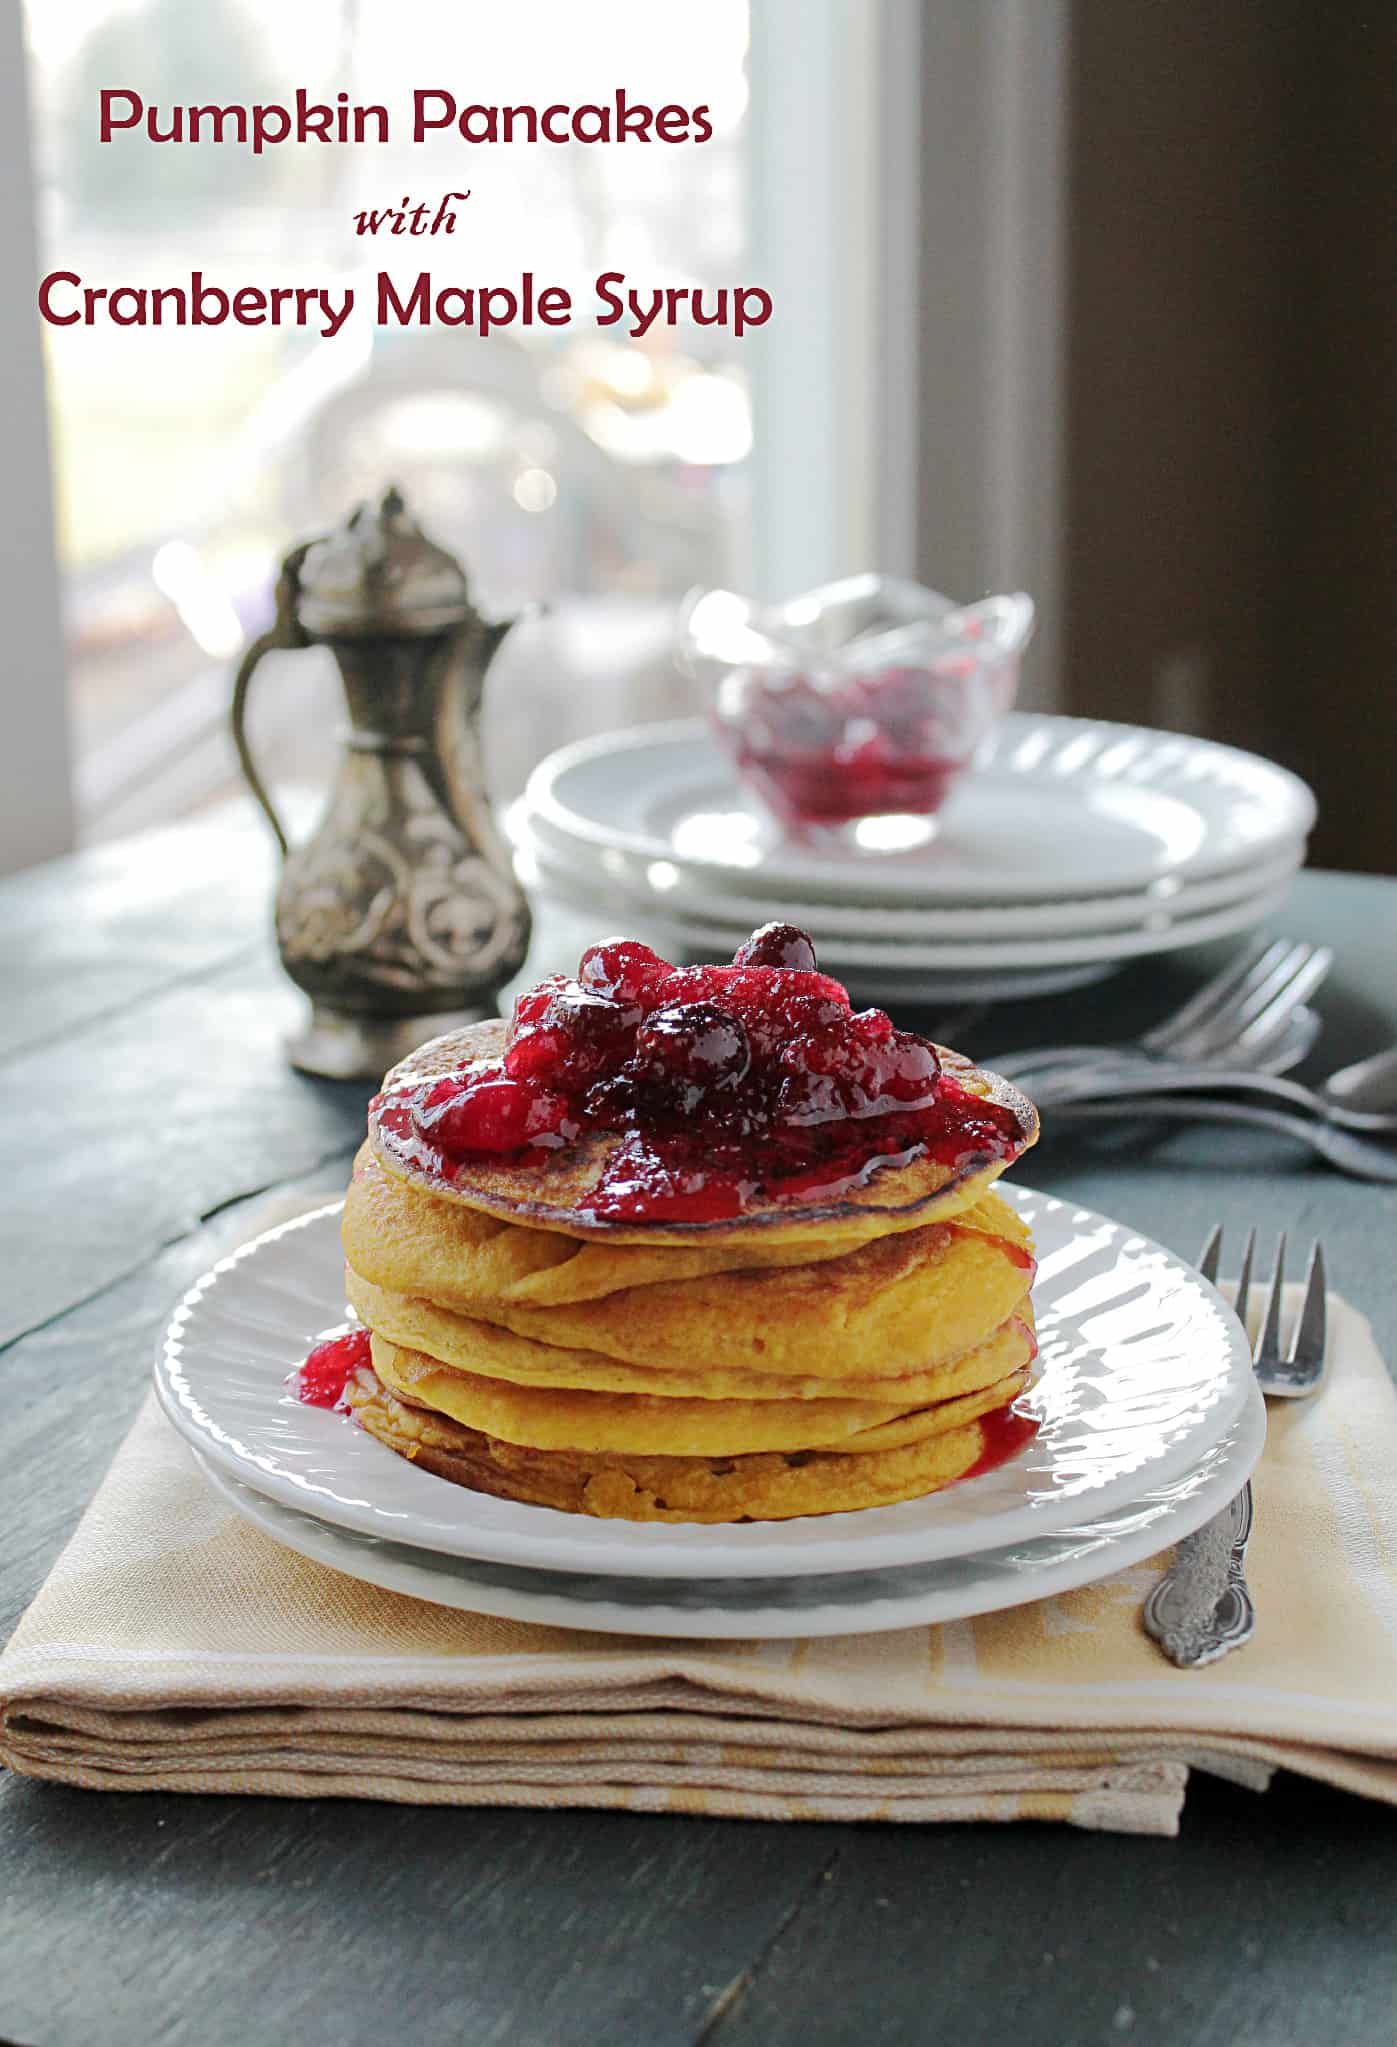 Pumpkin pancakes with cranberry maple syrup